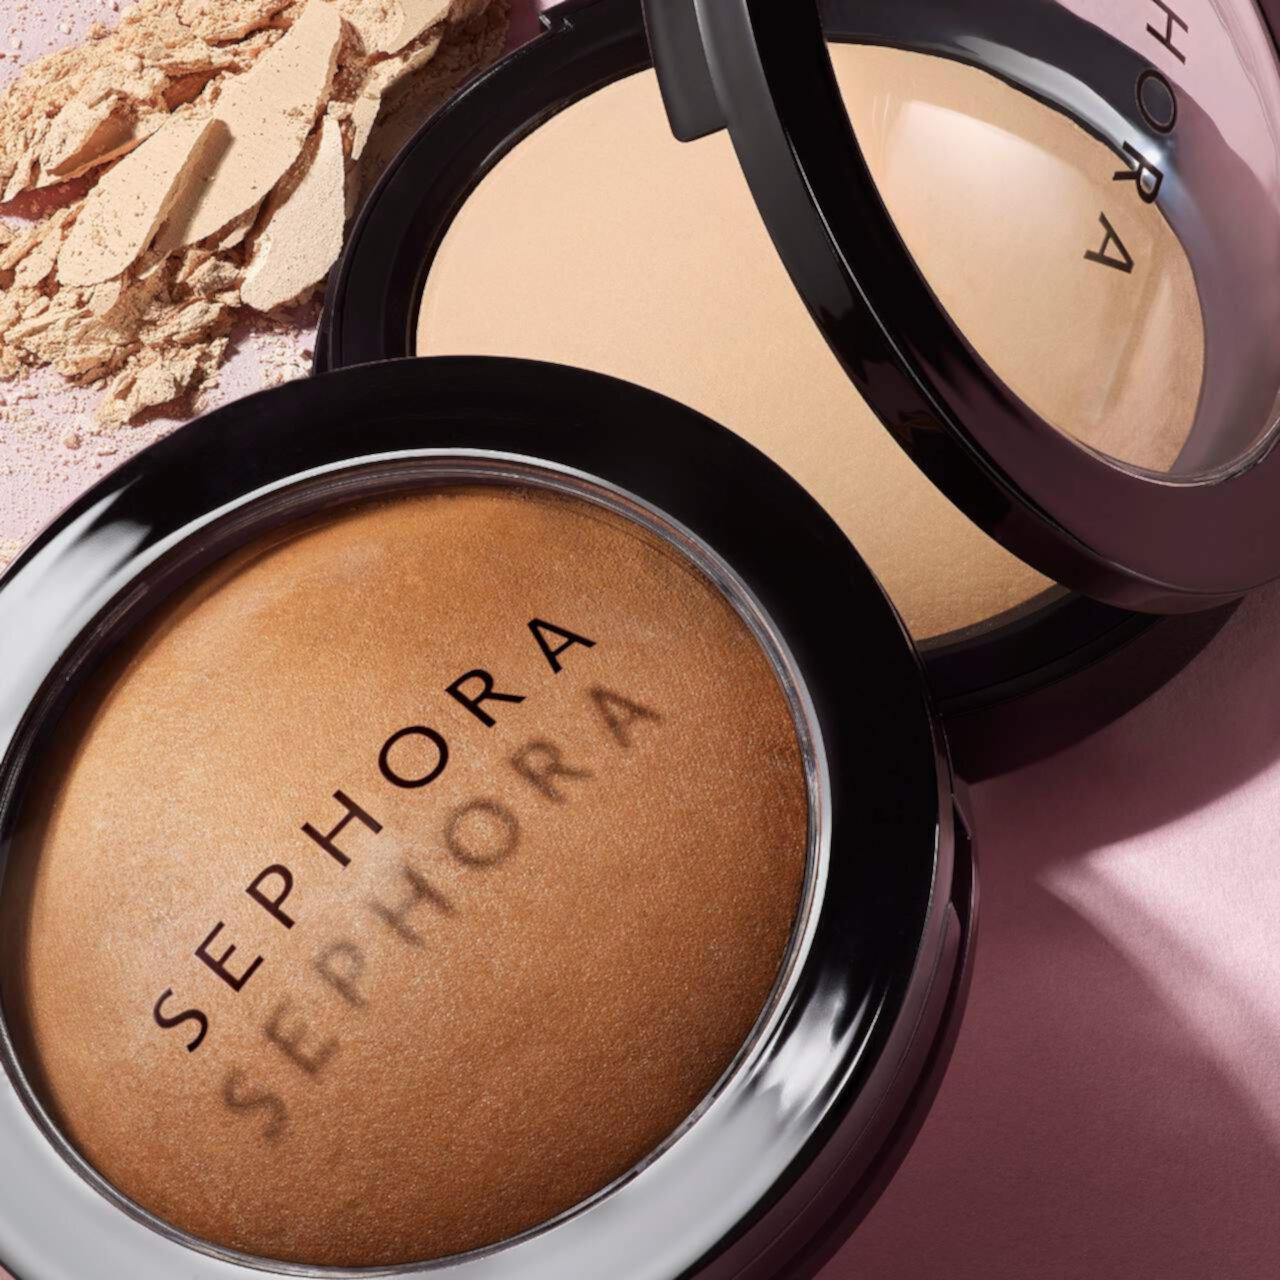 Microsmooth Multi-Tasking Baked Face Powder Foundation SEPHORA COLLECTION